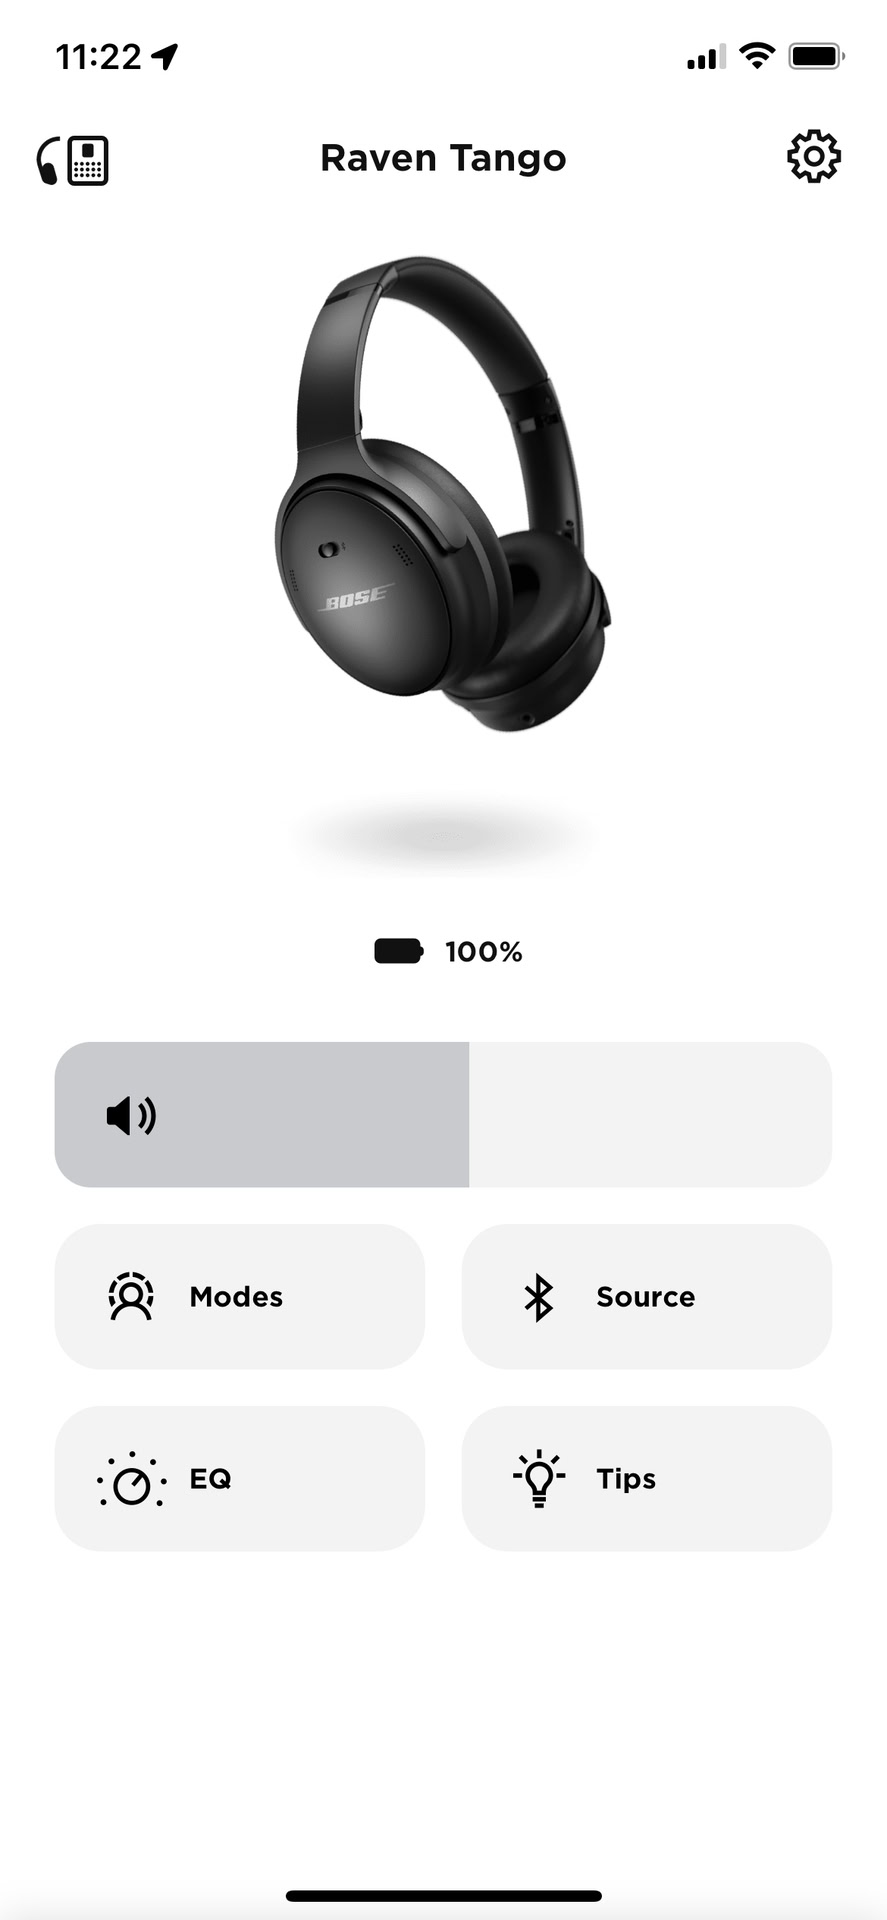 A screenshot of the February 2022 update of the Bose Music app with the Bose QuietComfort 45 connected showing the home screen with a new EQ button visible.